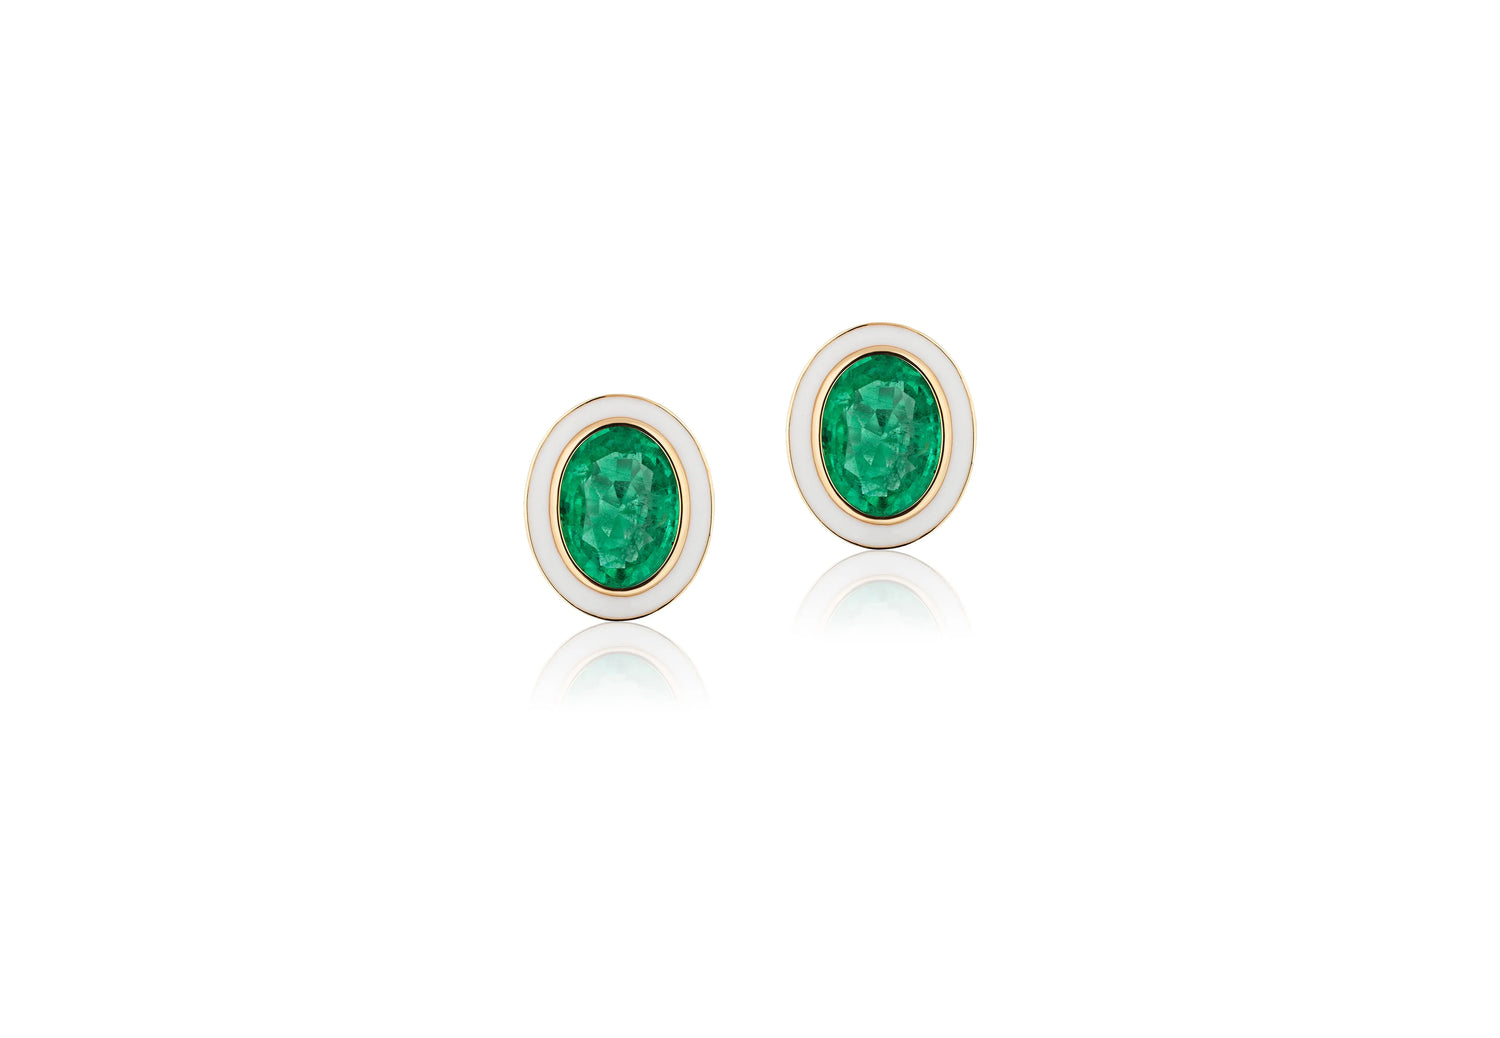 Queen' Emerald Oval surrounded by white enamel studs - Squash Blossom Vail